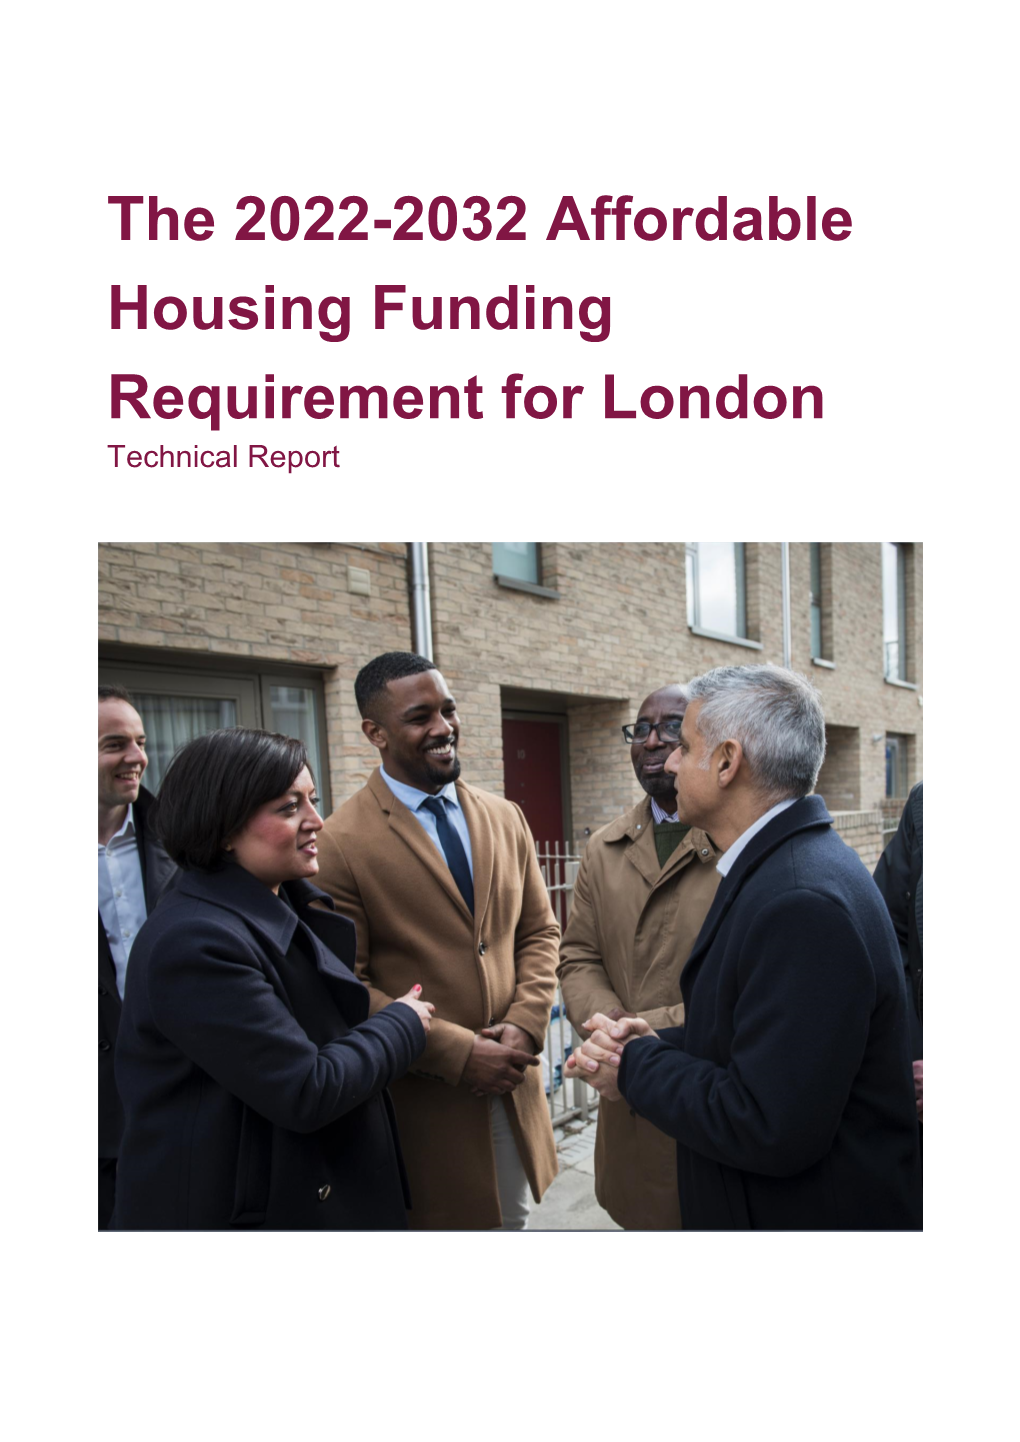 The 2022-2032 Affordable Housing Funding Requirement for London Technical Report